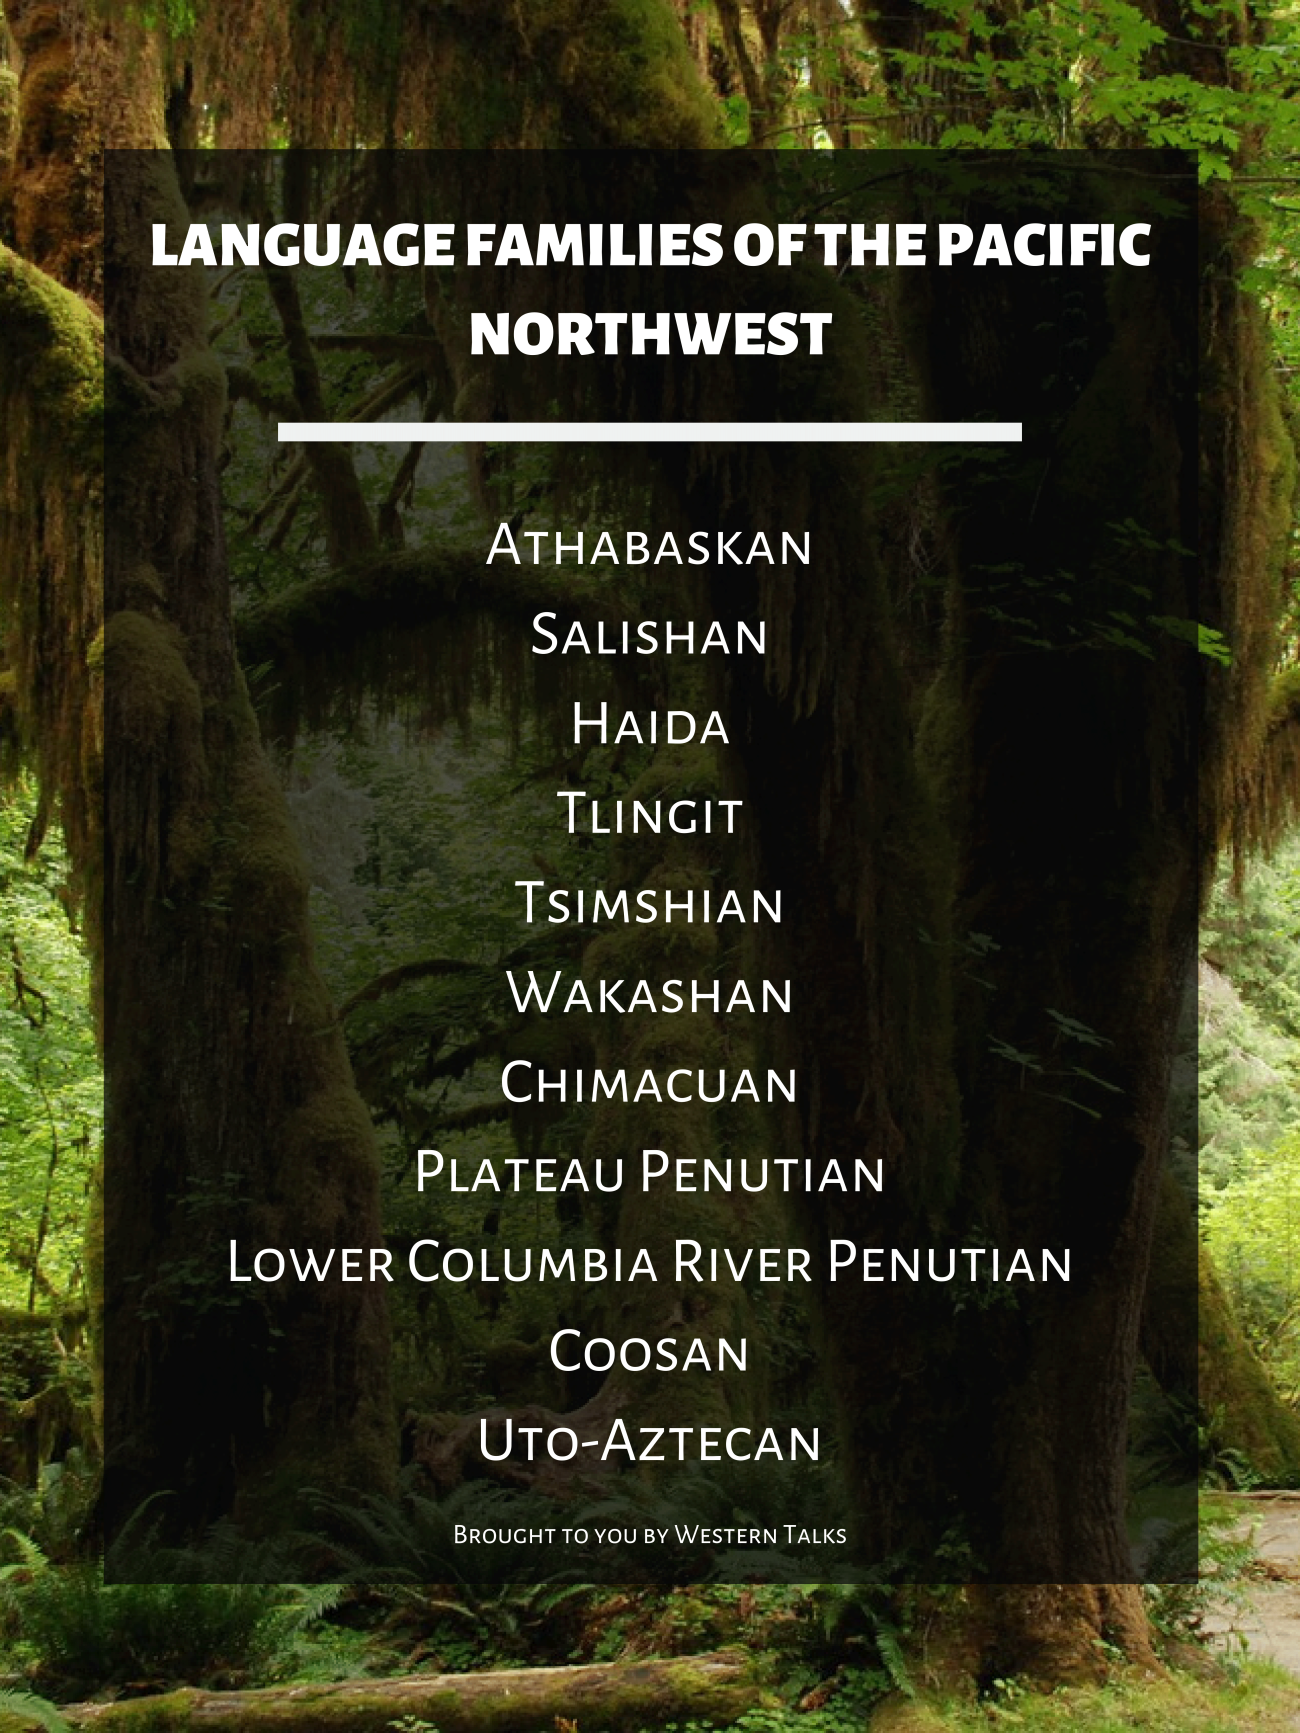 Linguistics Poster. Language Families of the Pacific Northwest. See webpage for full description.